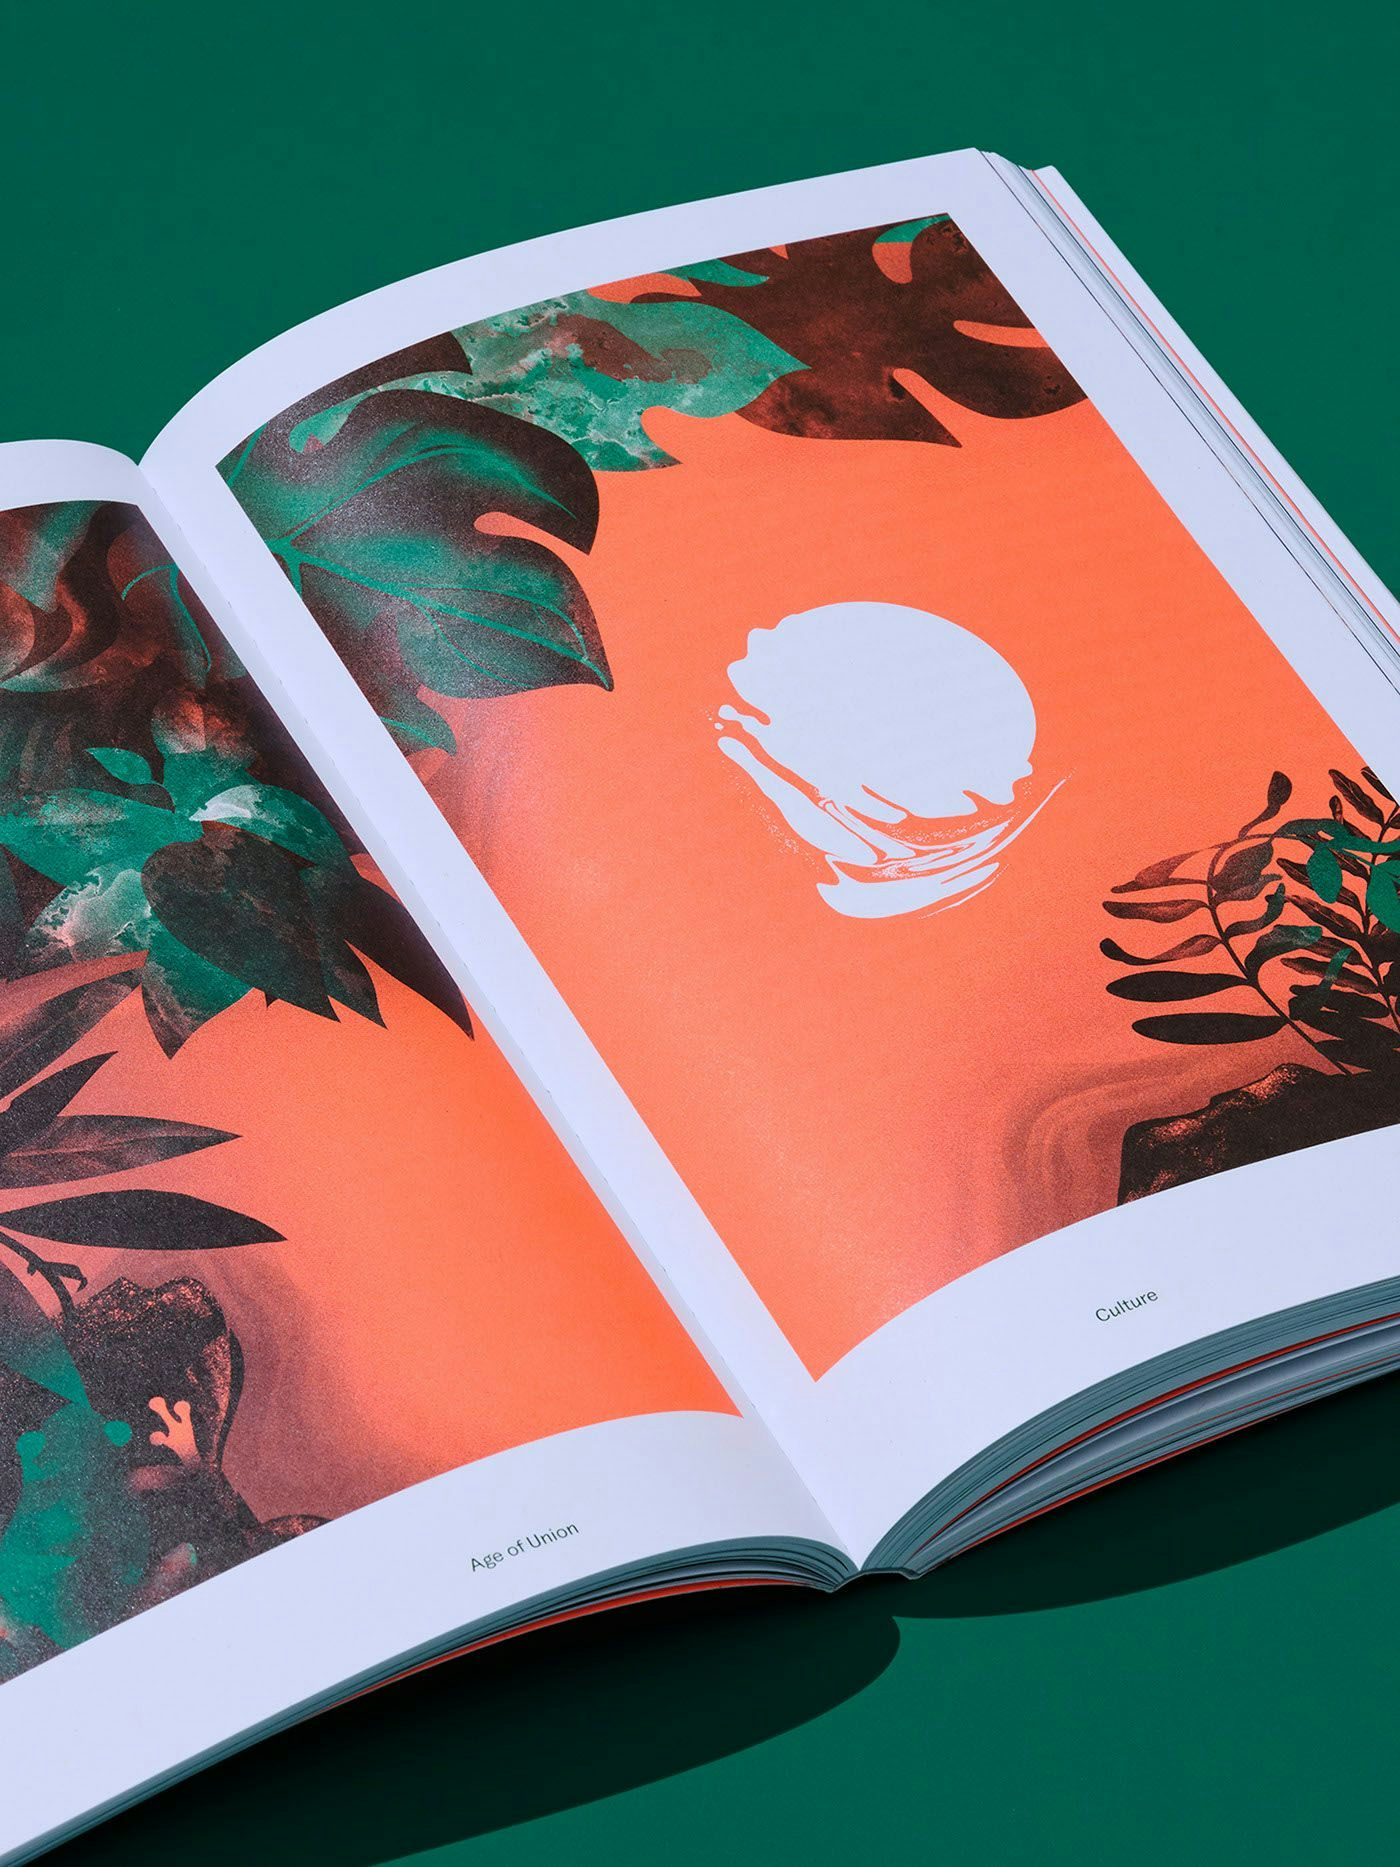  Open book showcasing an orange page with a white circular design and leafy shadows, from "Age of Union."